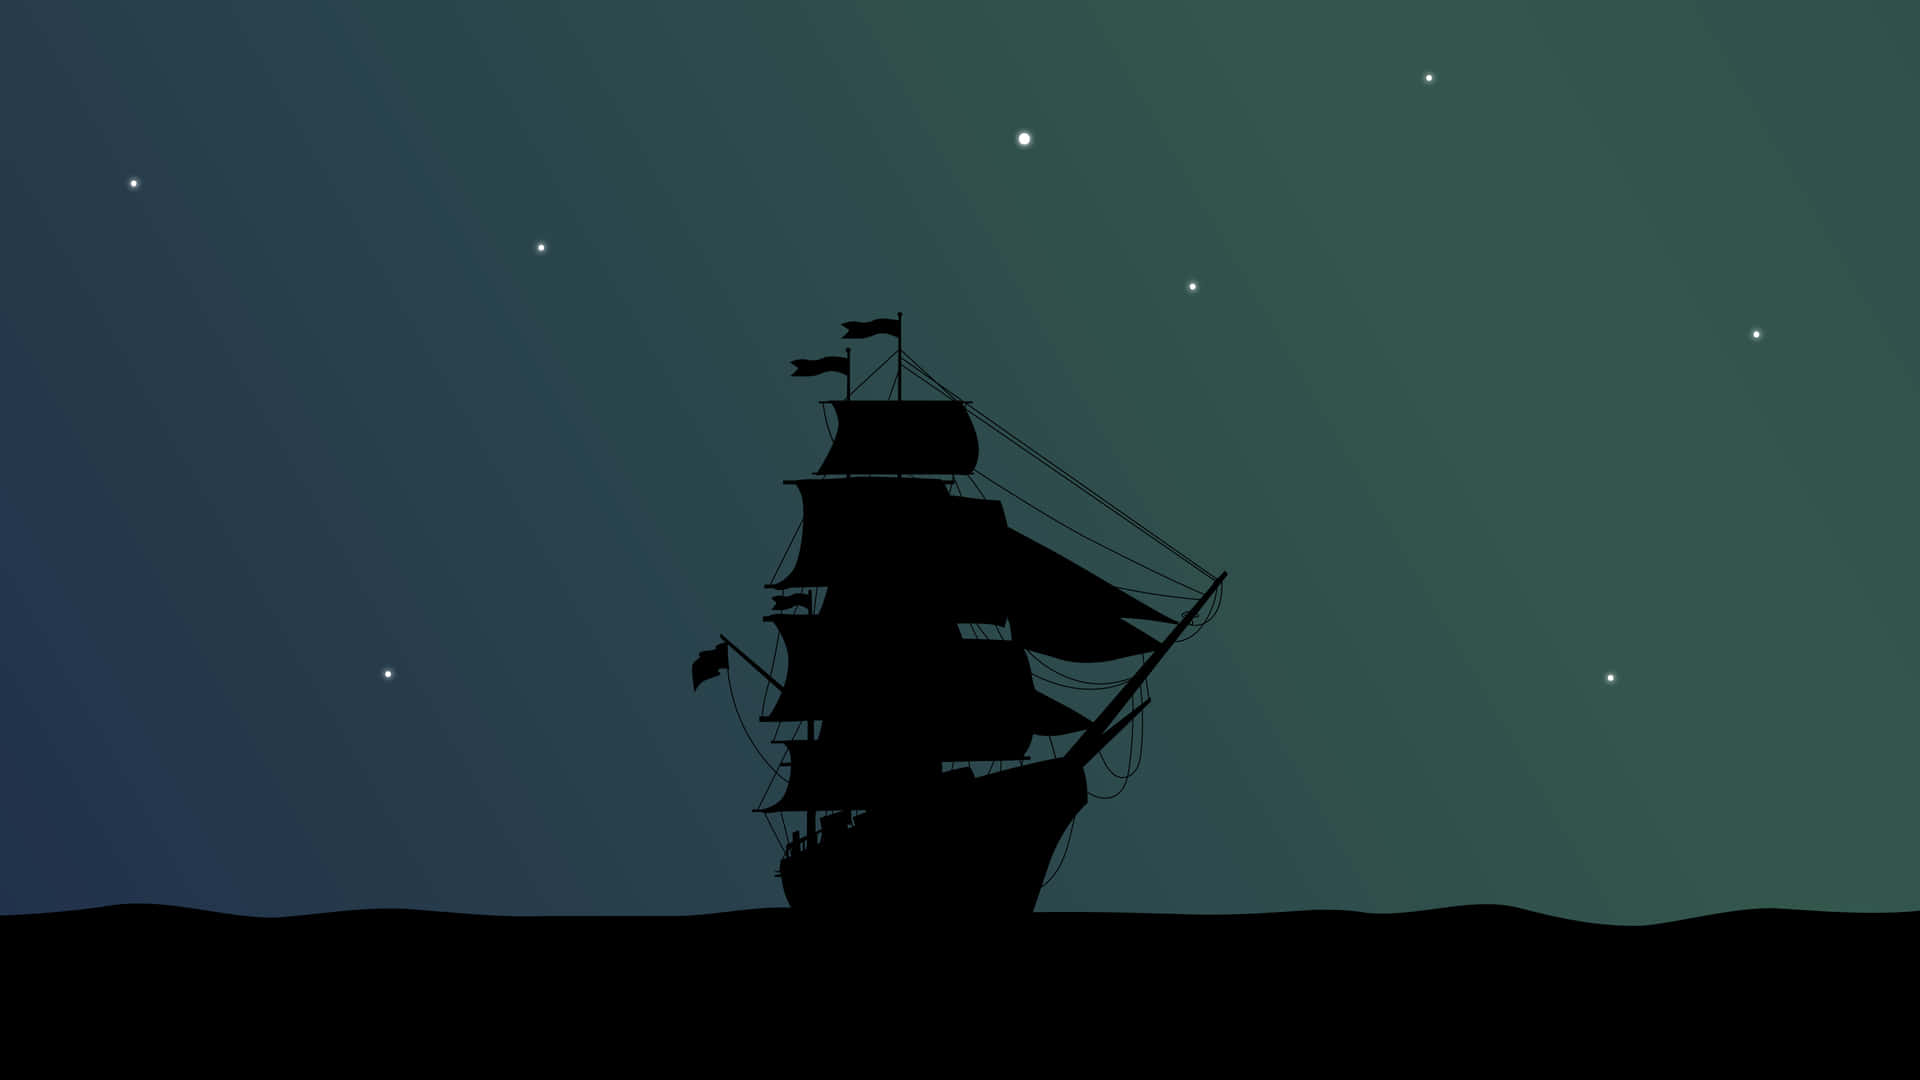 A Ship Silhouetted In The Night Sky Wallpaper